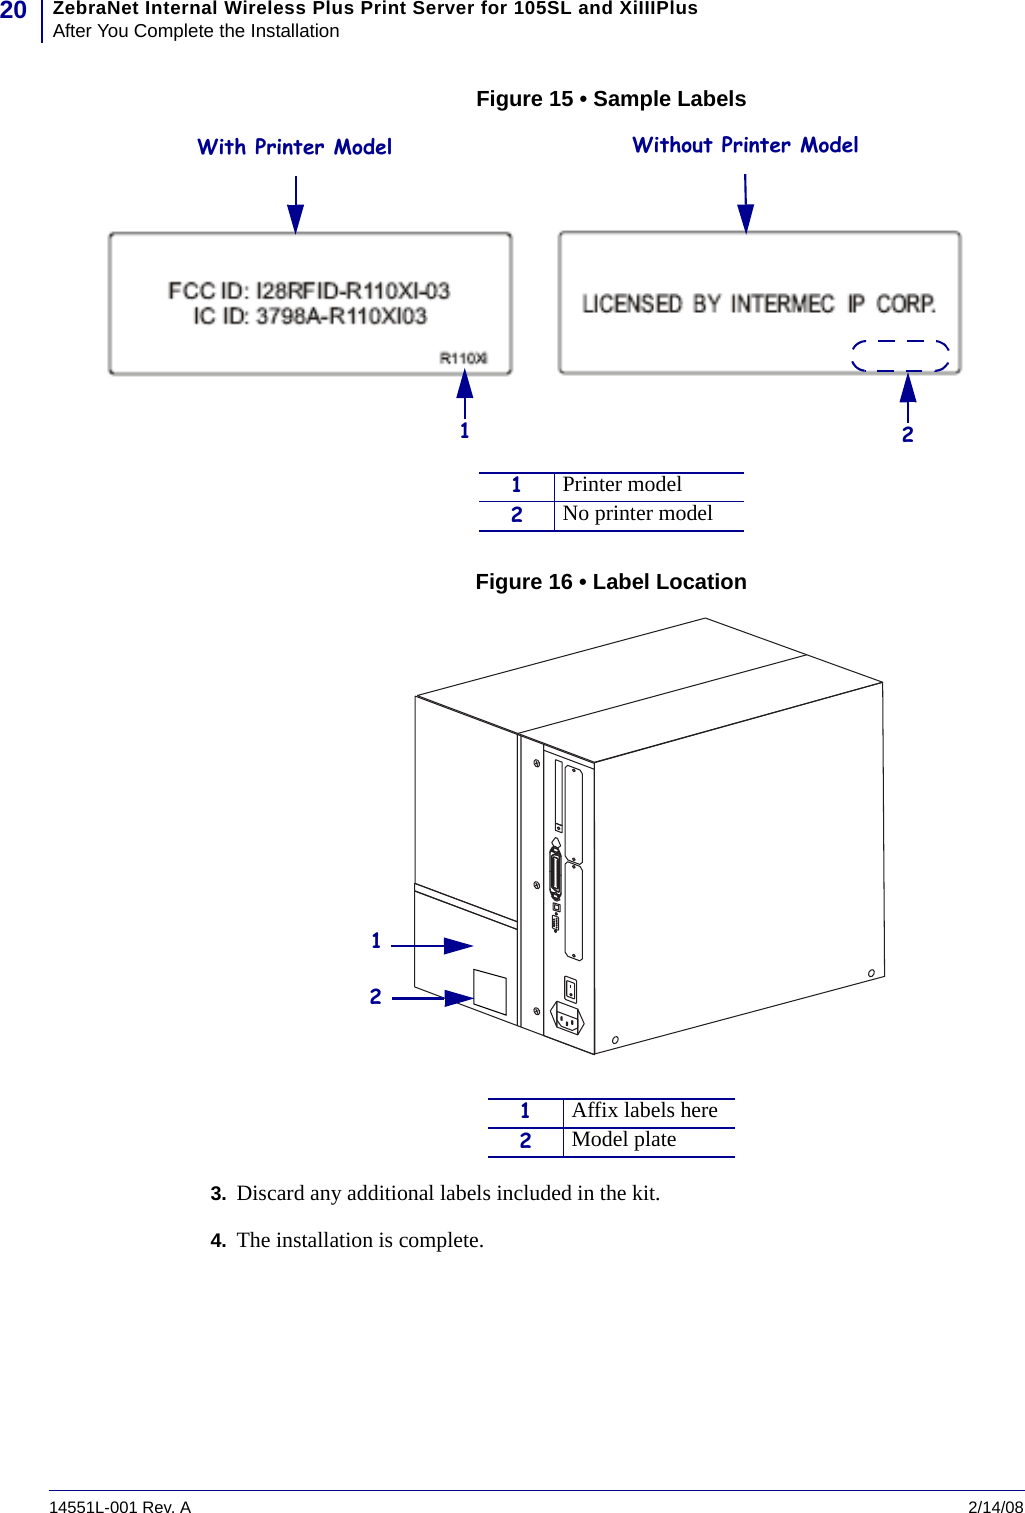 ZebraNet Internal Wireless Plus Print Server for 105SL and XiIIIPlusAfter You Complete the Installation2014551L-001 Rev. A   2/14/08Figure 15 • Sample LabelsFigure 16 • Label Location3. Discard any additional labels included in the kit.4. The installation is complete.With Printer Model21Without Printer Model1Printer model2No printer model1Affix labels here2Model plate12